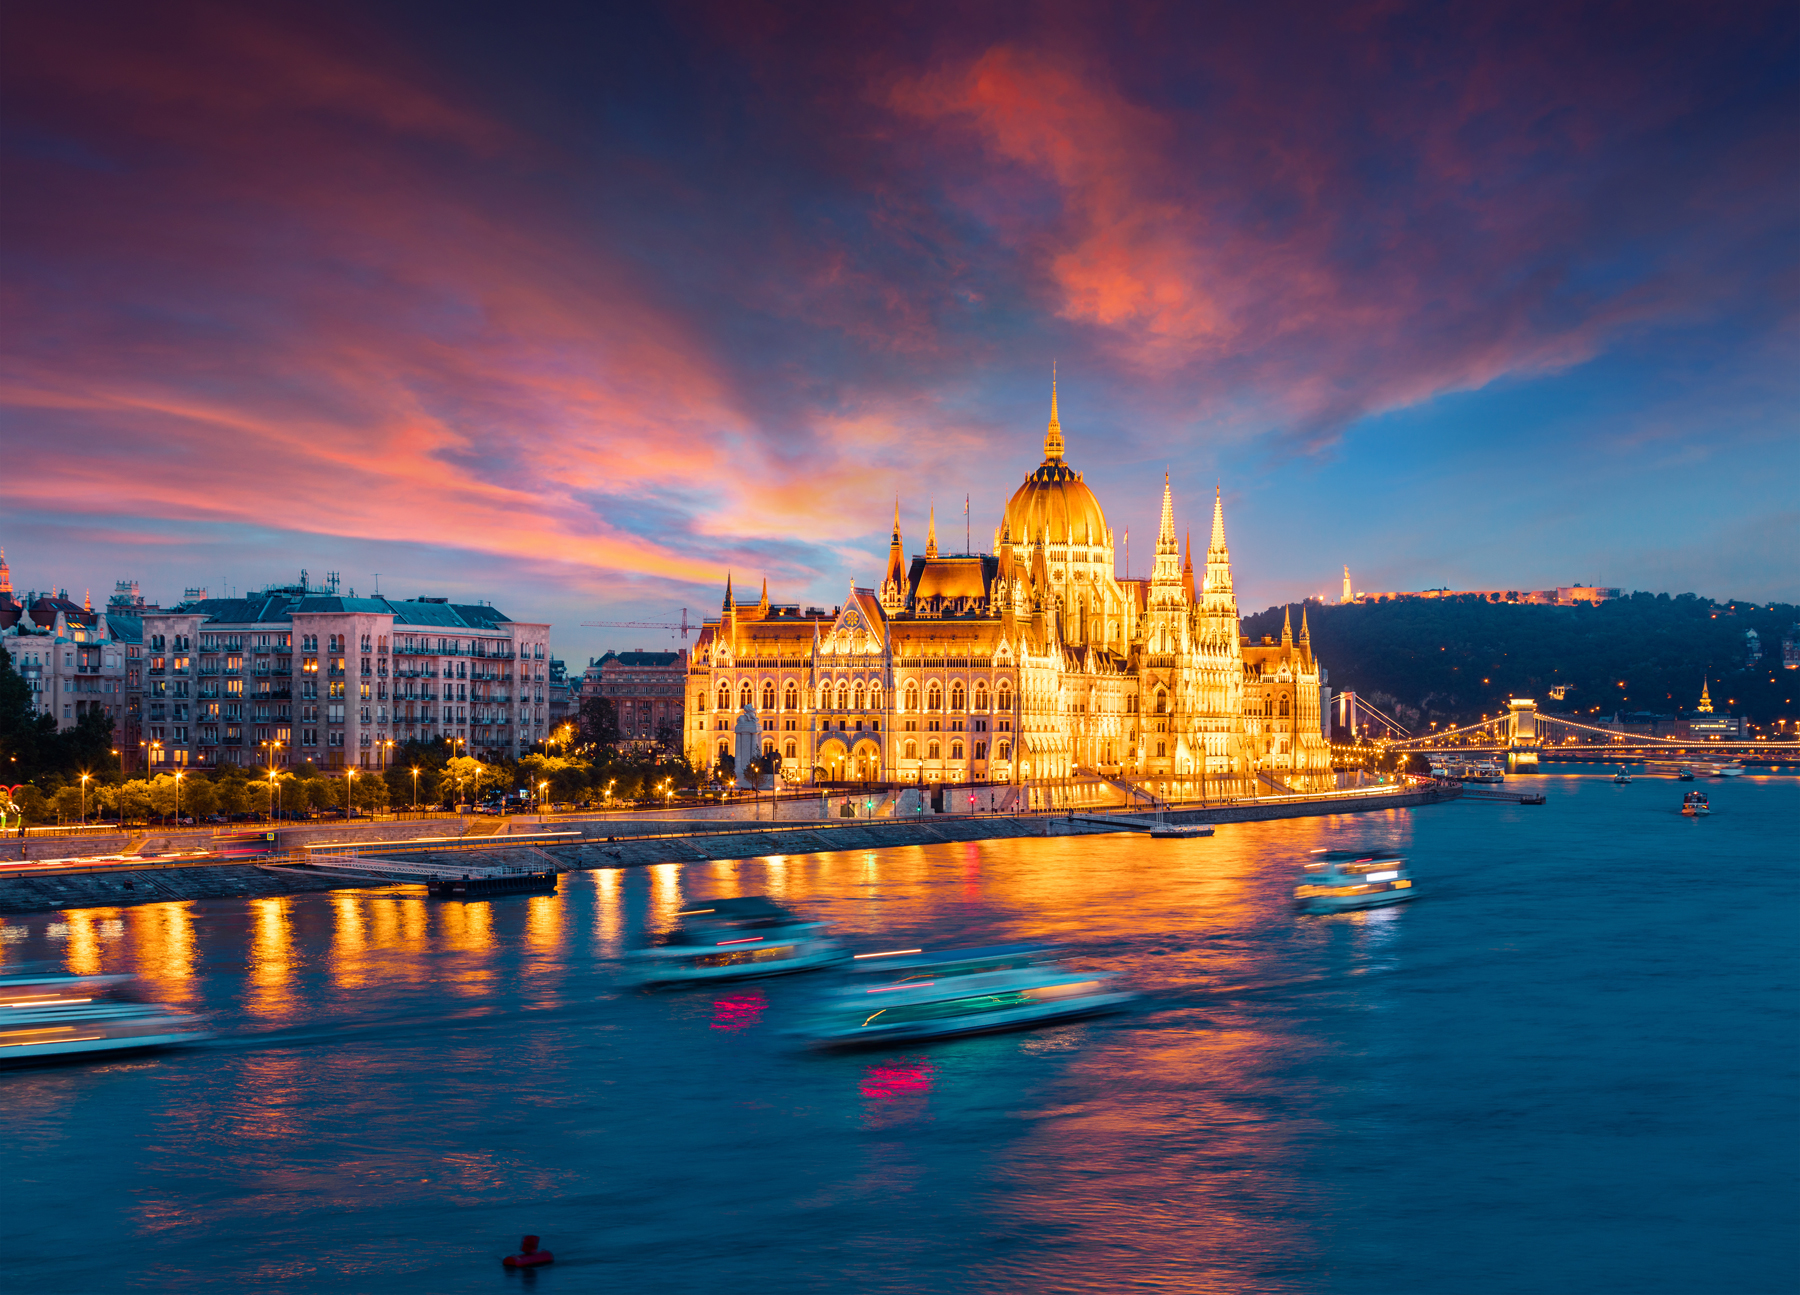 Must-see sites in Budapest